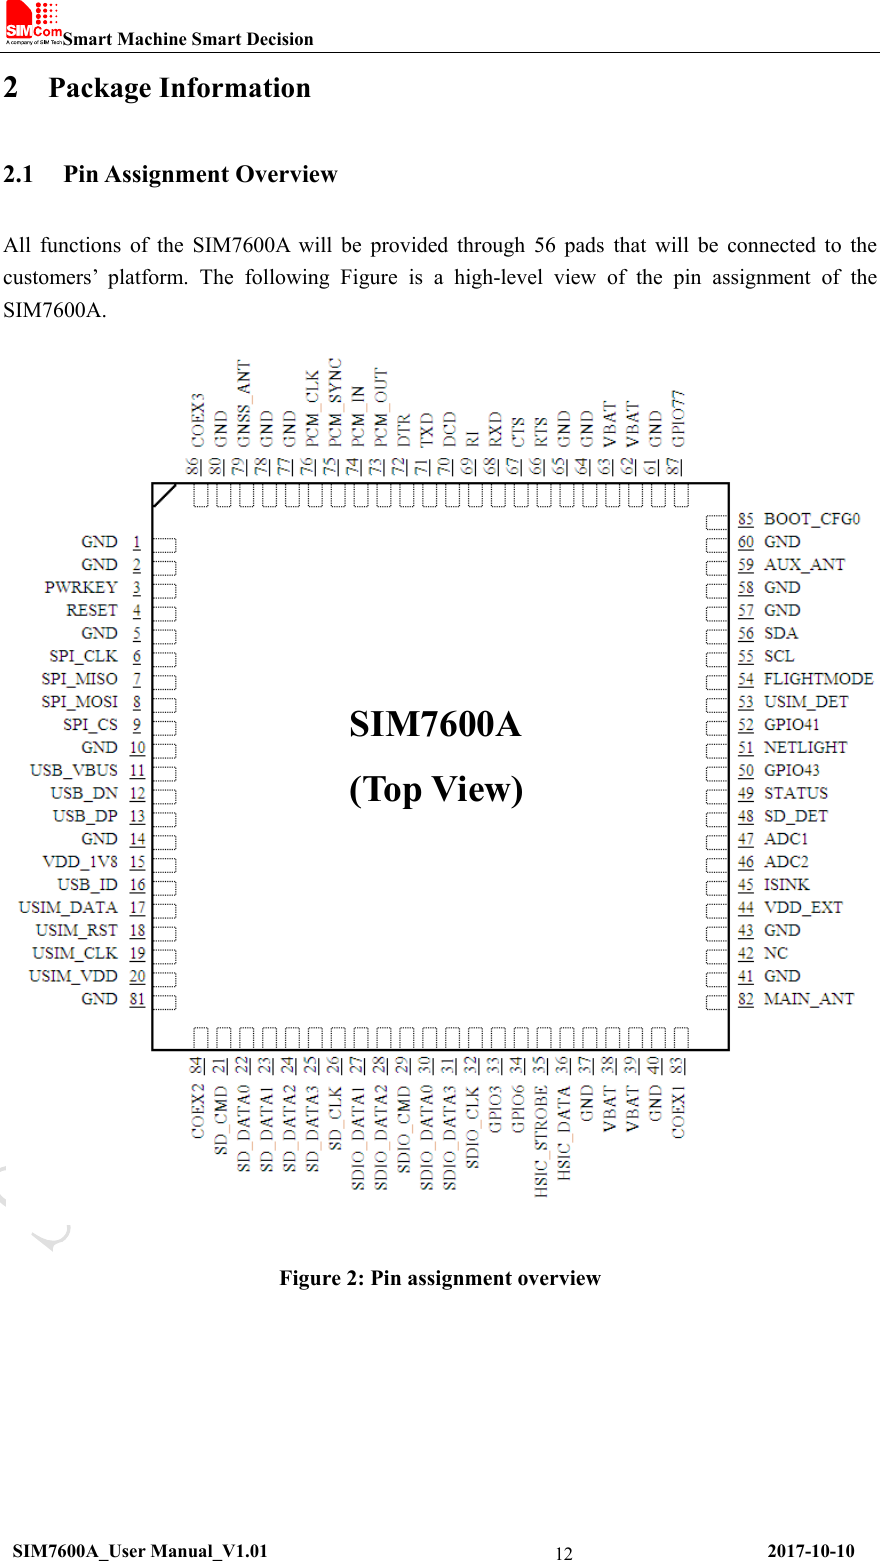 Smart Machine Smart Decision  SIM7600A_User Manual_V1.01                                                     2017-10-10 122 Package Information 2.1 Pin Assignment Overview All functions of the SIM7600A will be provided through 56 pads that will be connected to the customers’ platform. The following Figure is a high-level view of the pin assignment of the SIM7600A.  Figure 2: Pin assignment overview SIM7600A (Top View) 